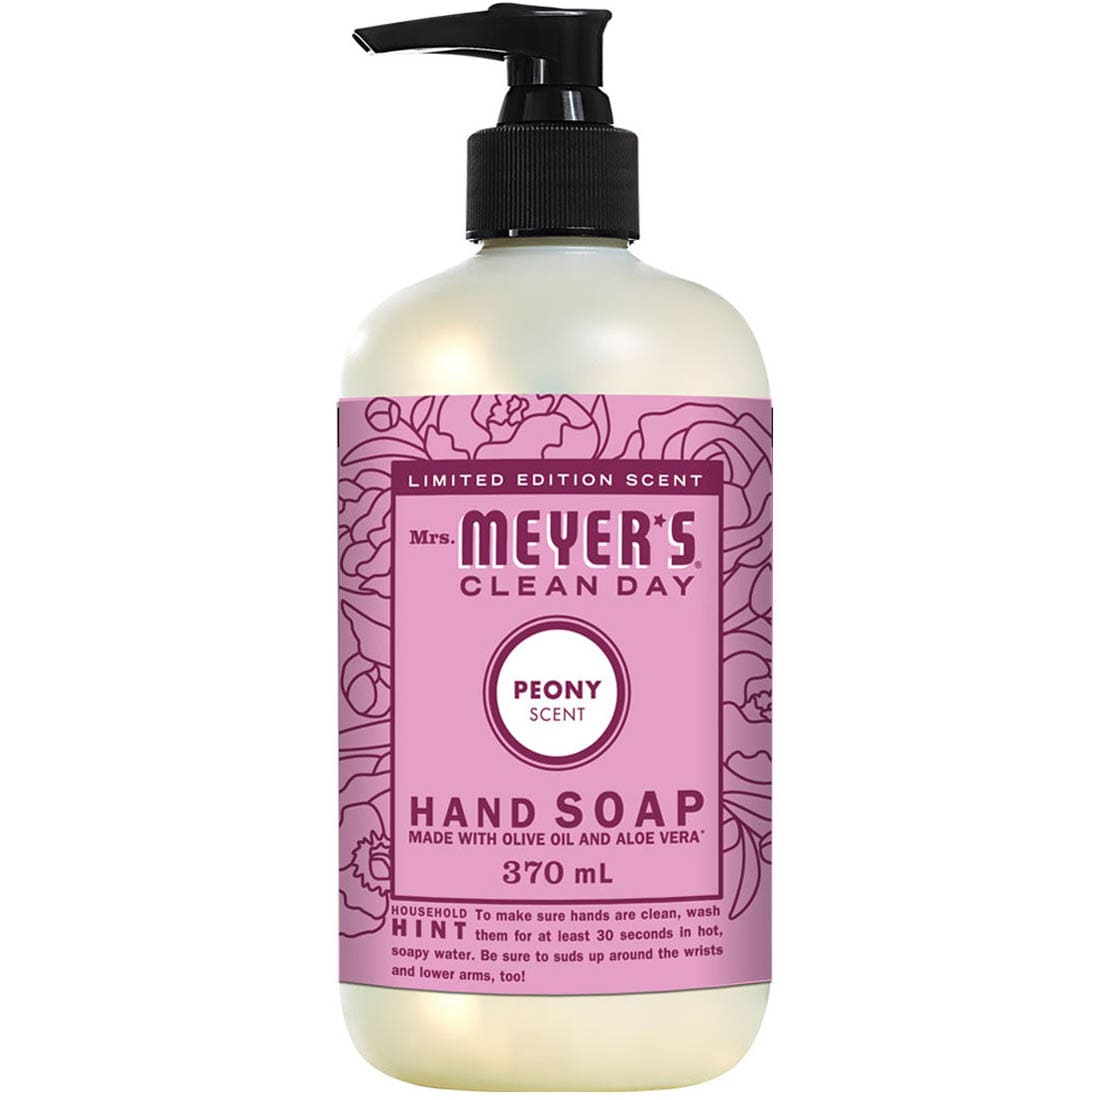 Mrs. Meyer's Clean Day Hand Soap